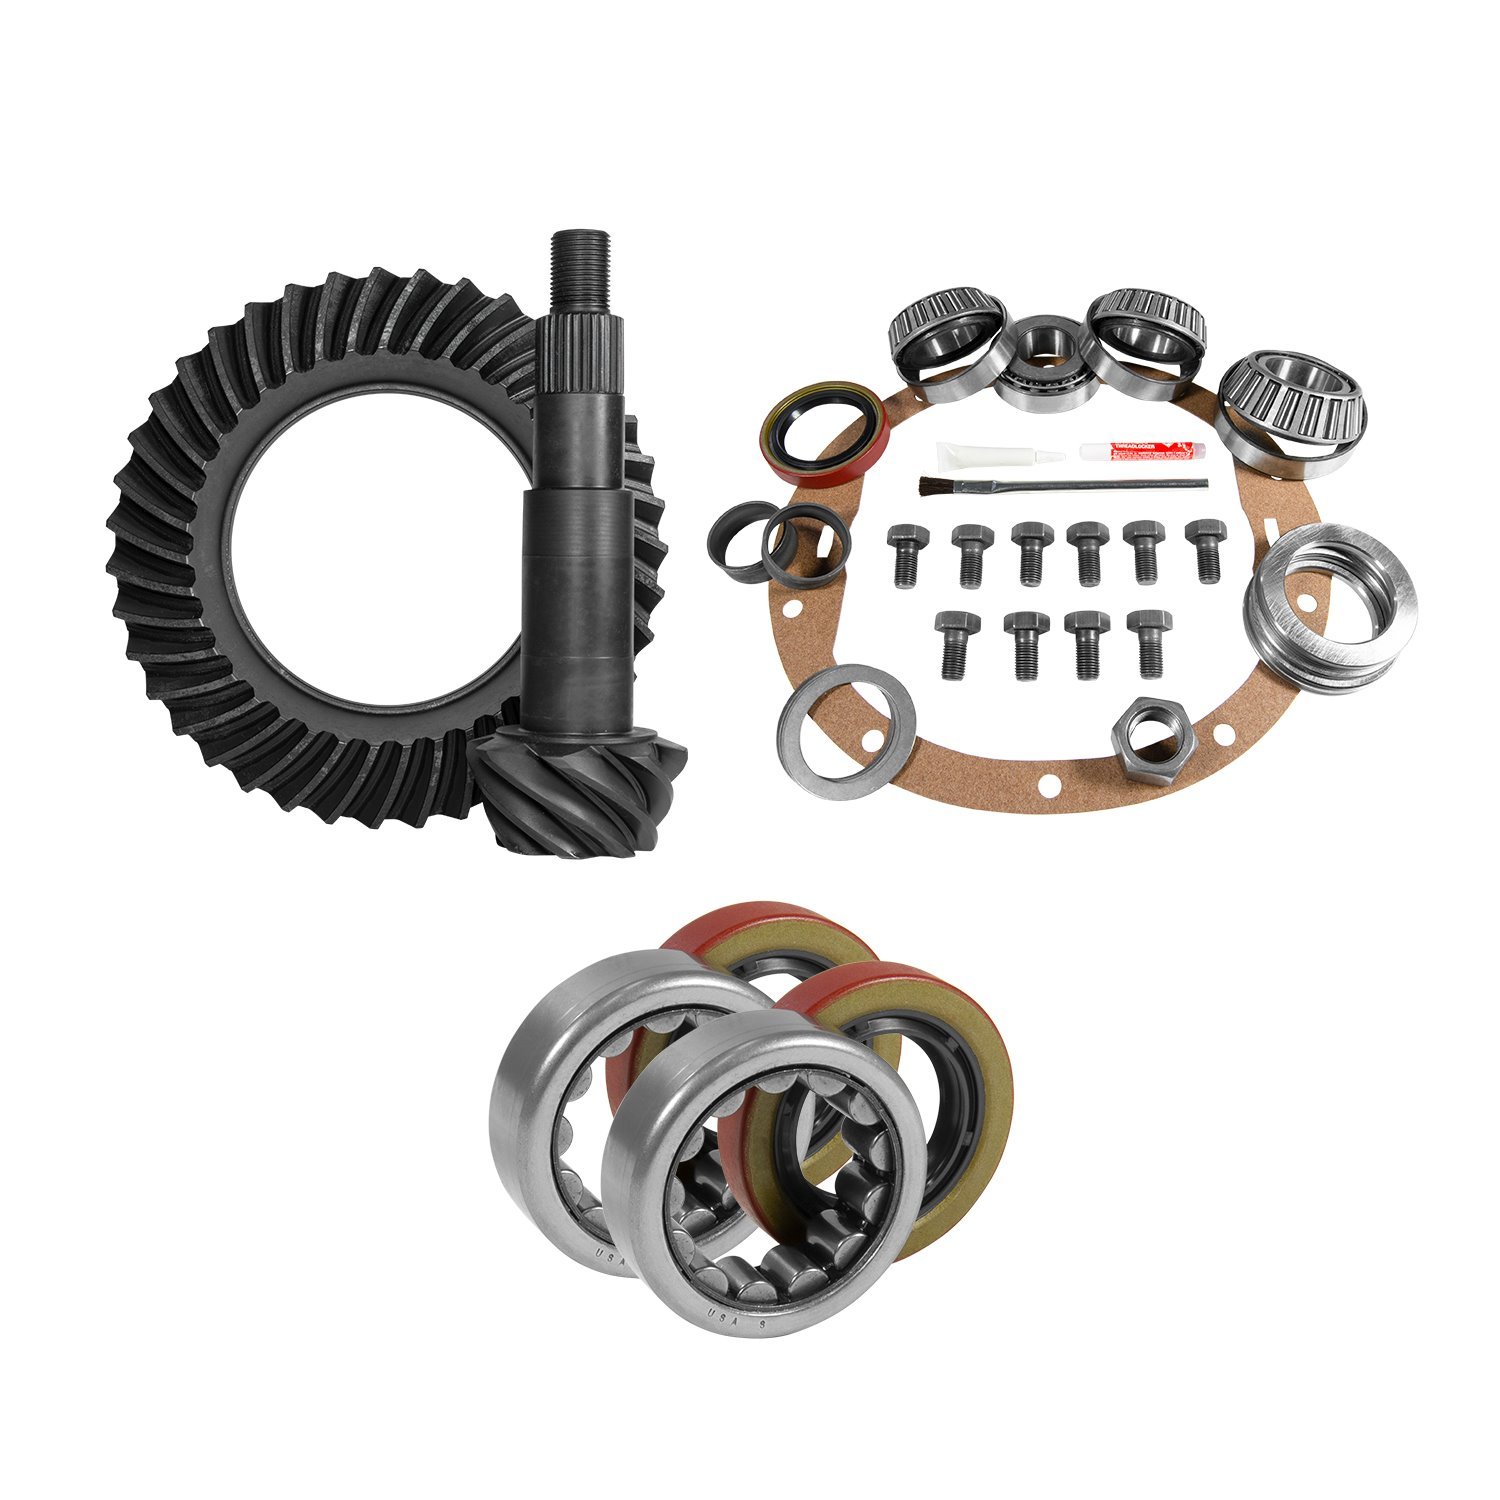 Muscle Car Re-Gear Kit For GM 8.5 in. Diff, 30 Spline, 3.90 Ratio